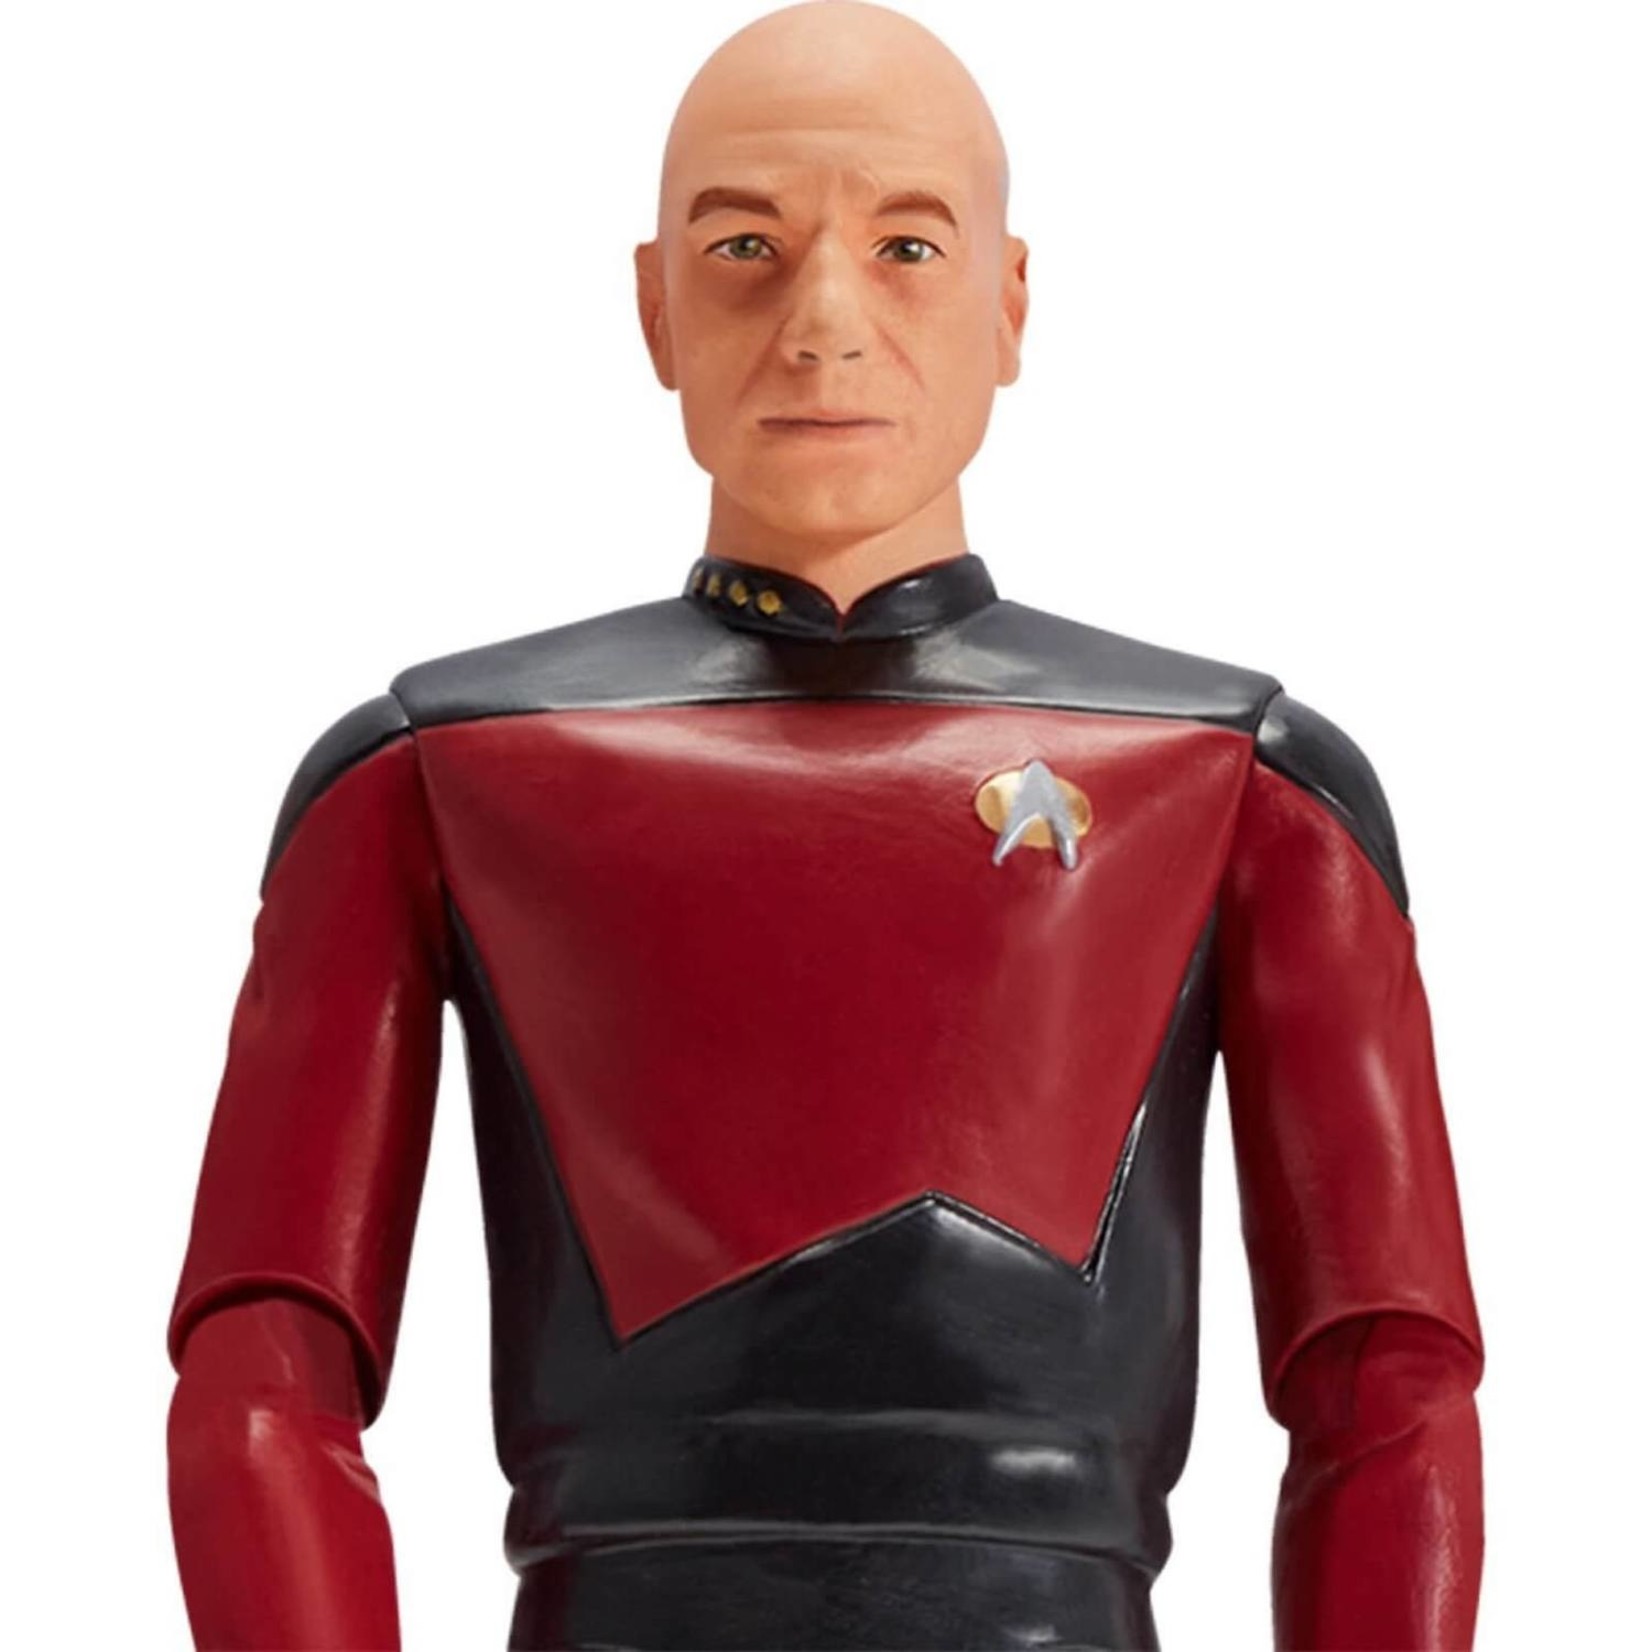 Playmates Toys Playmates Toys Star Trek The Next Generation Jean-Luc Picard 5 Inch Action Figure